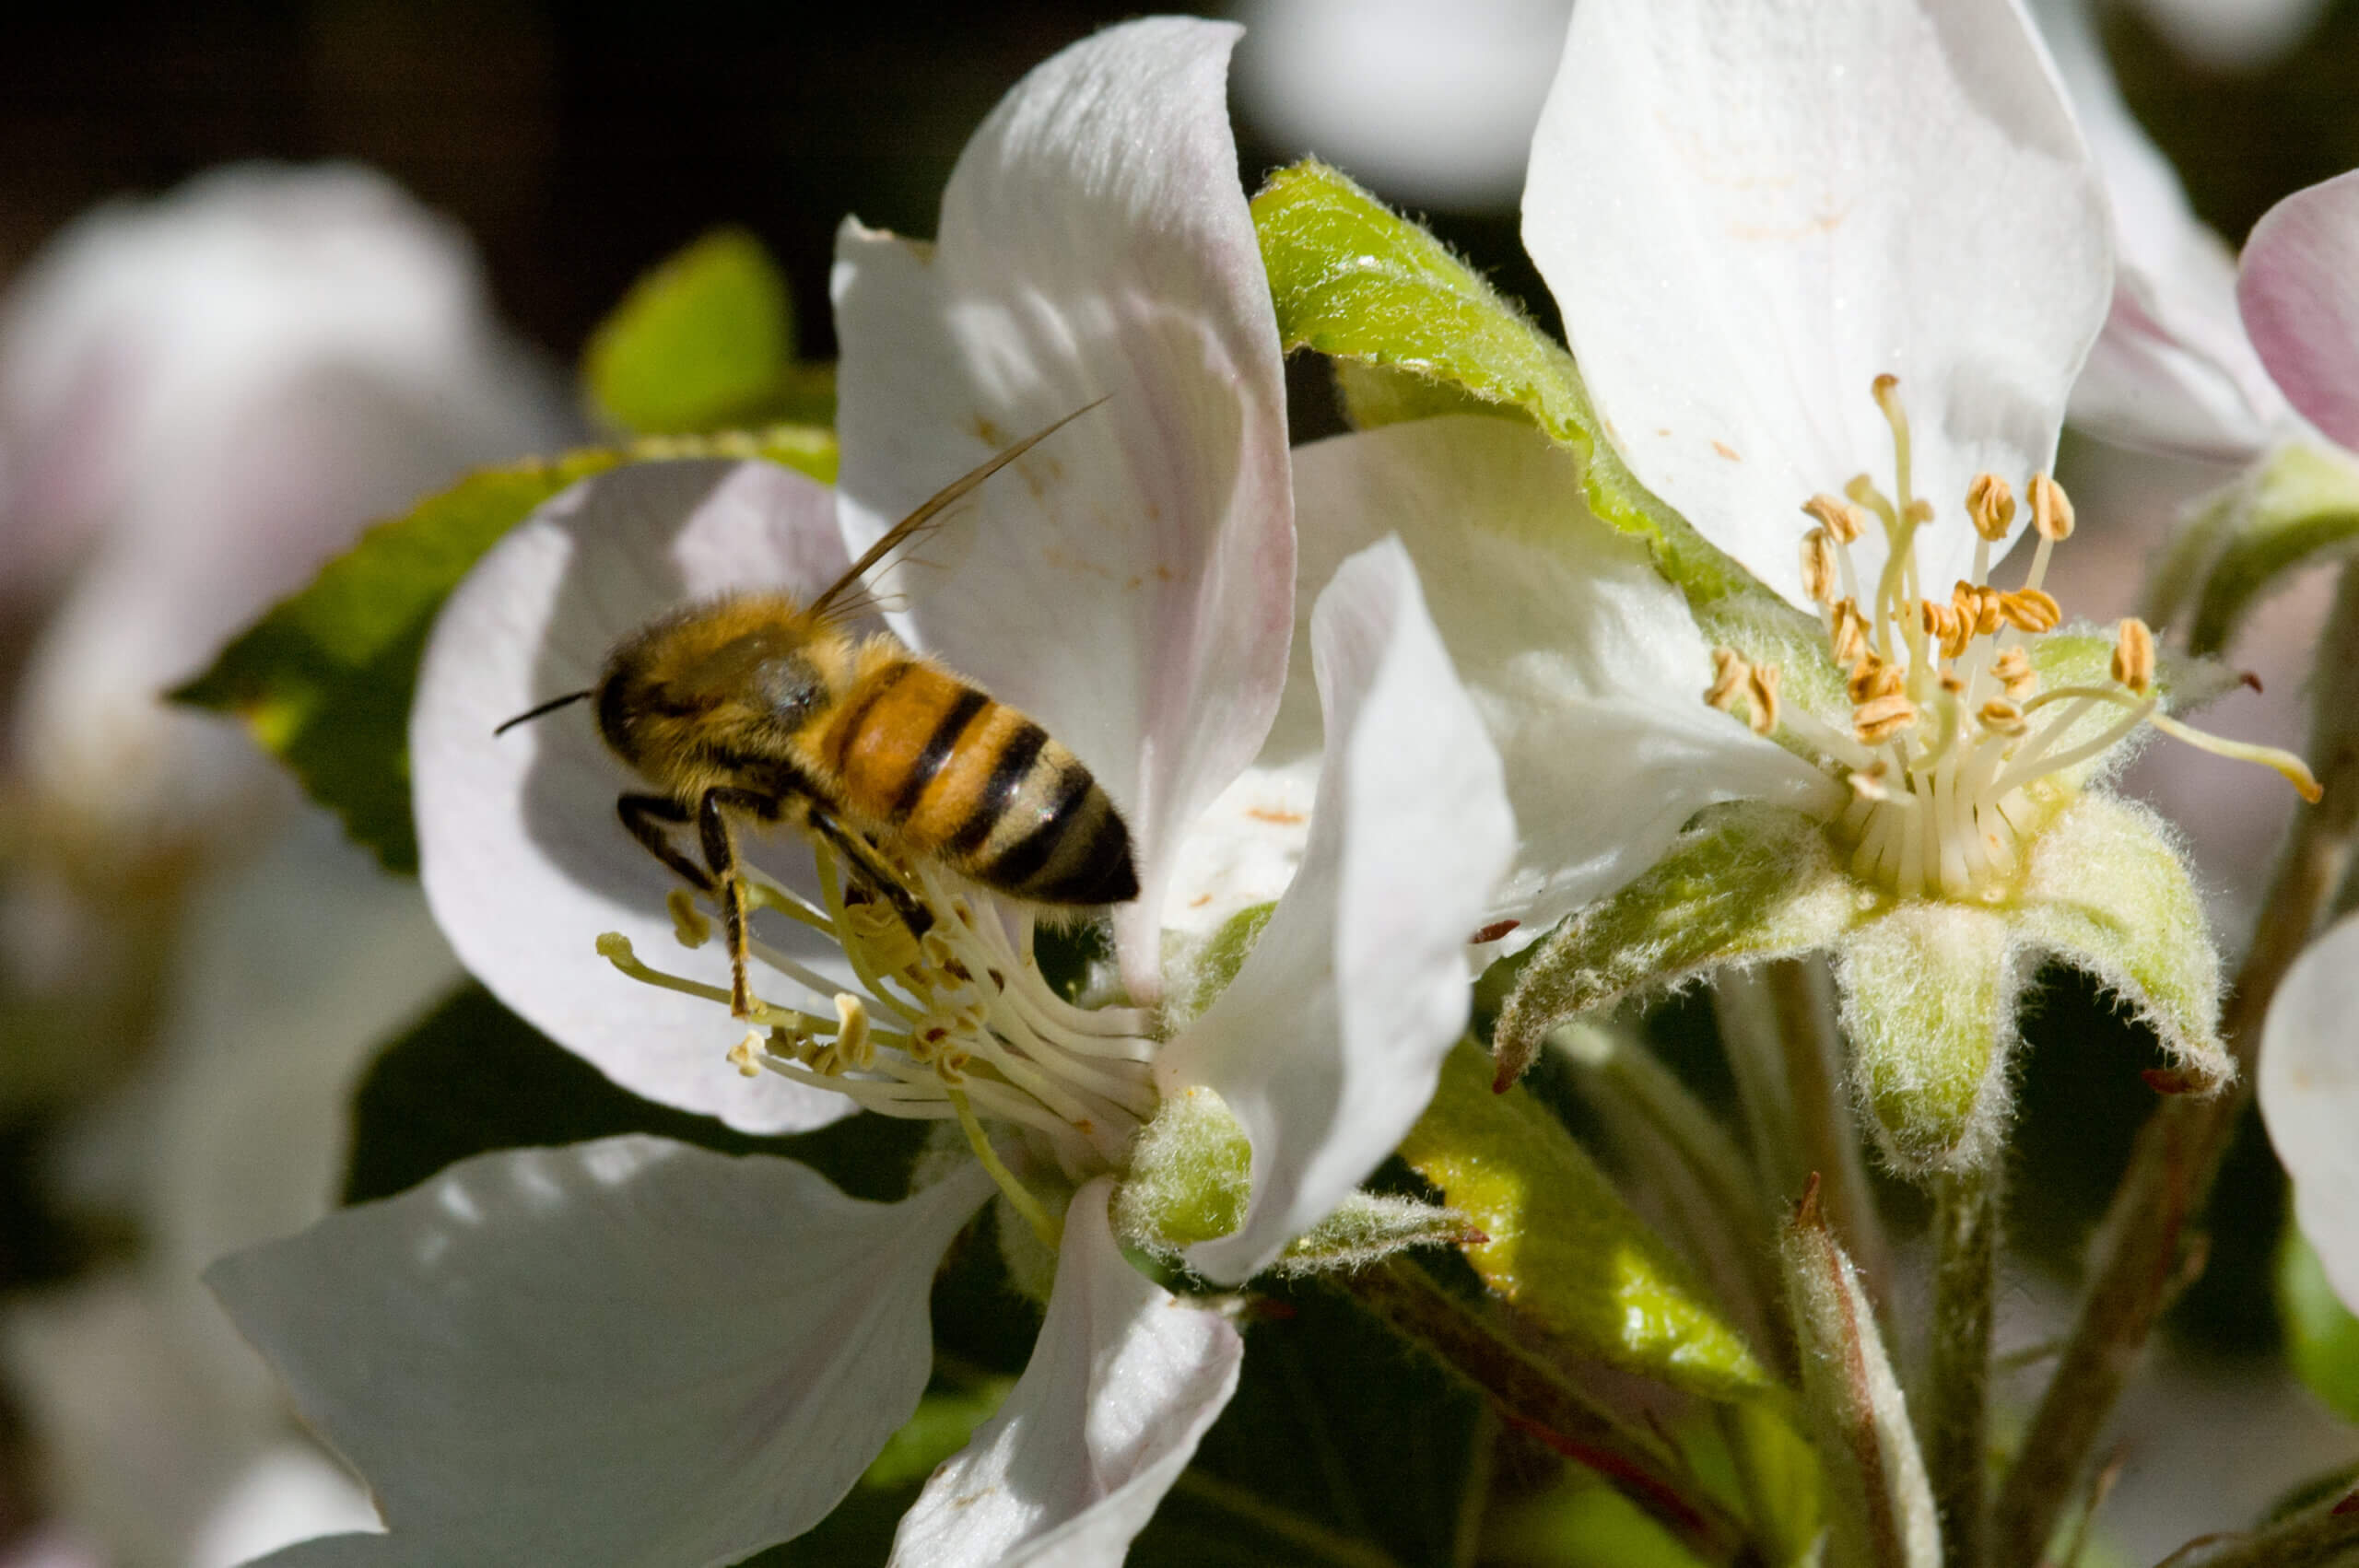 A bee pollinating a blossom.